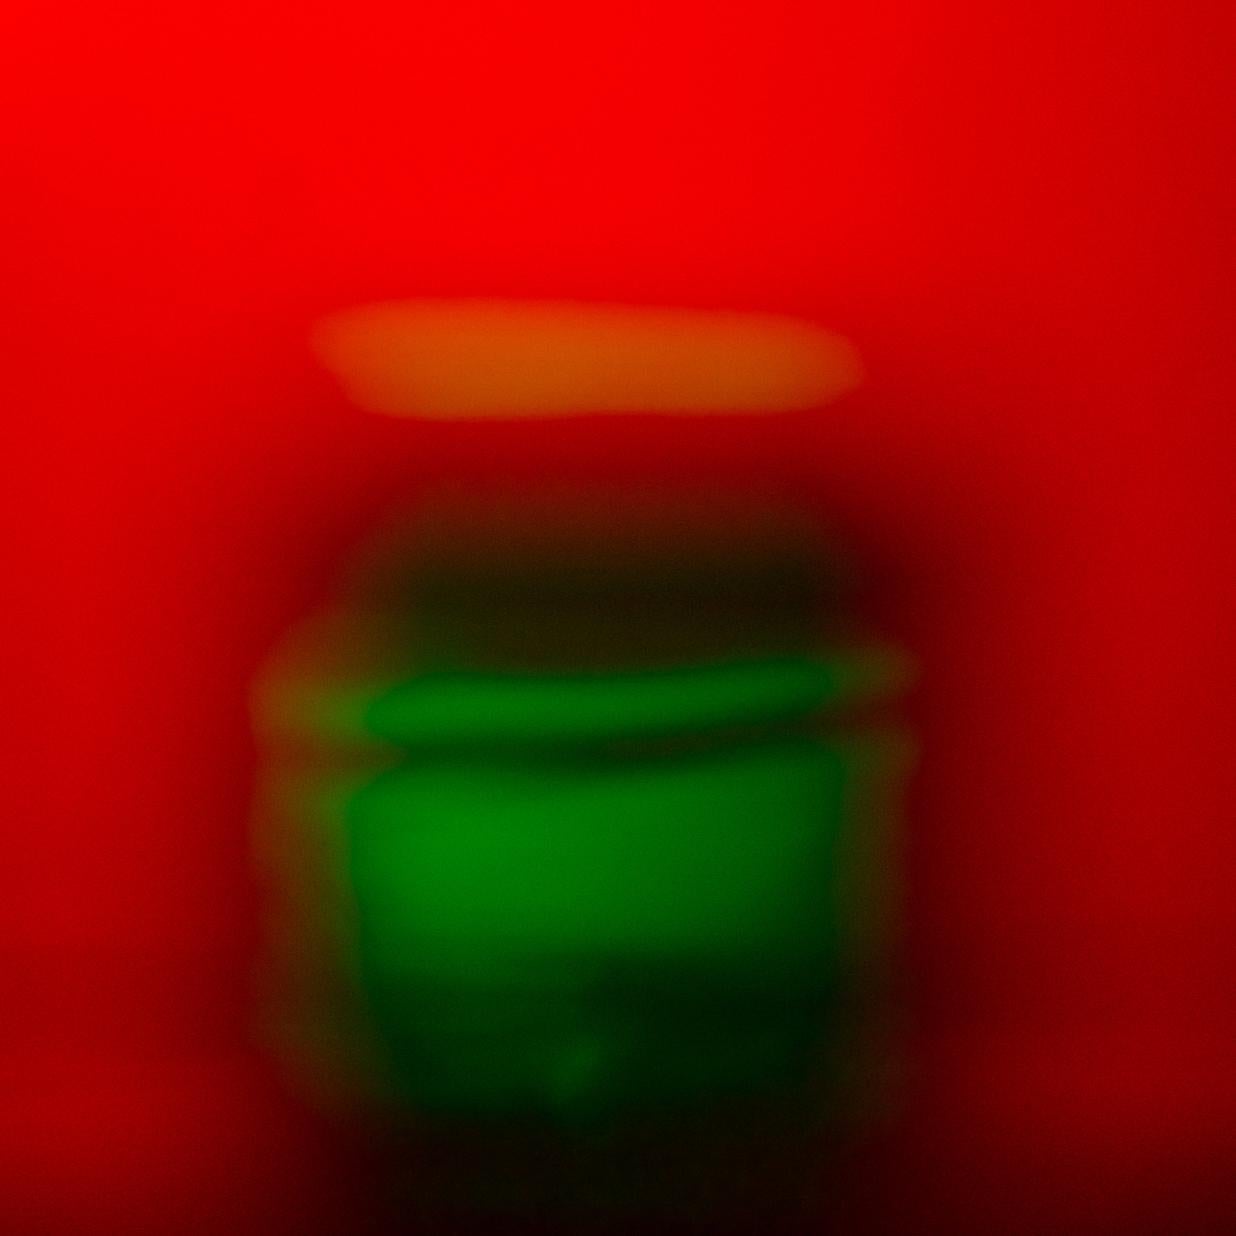 Untitled, P81_6840 (Abstract photography)

Archival pigment print, blind embossed stamp, and signed by the artist. Limited edition of 9. Unframed.
Shipments are in a hard tube, protected with acid-free tissue.

Jurek Wajdowicz is a Polish-American